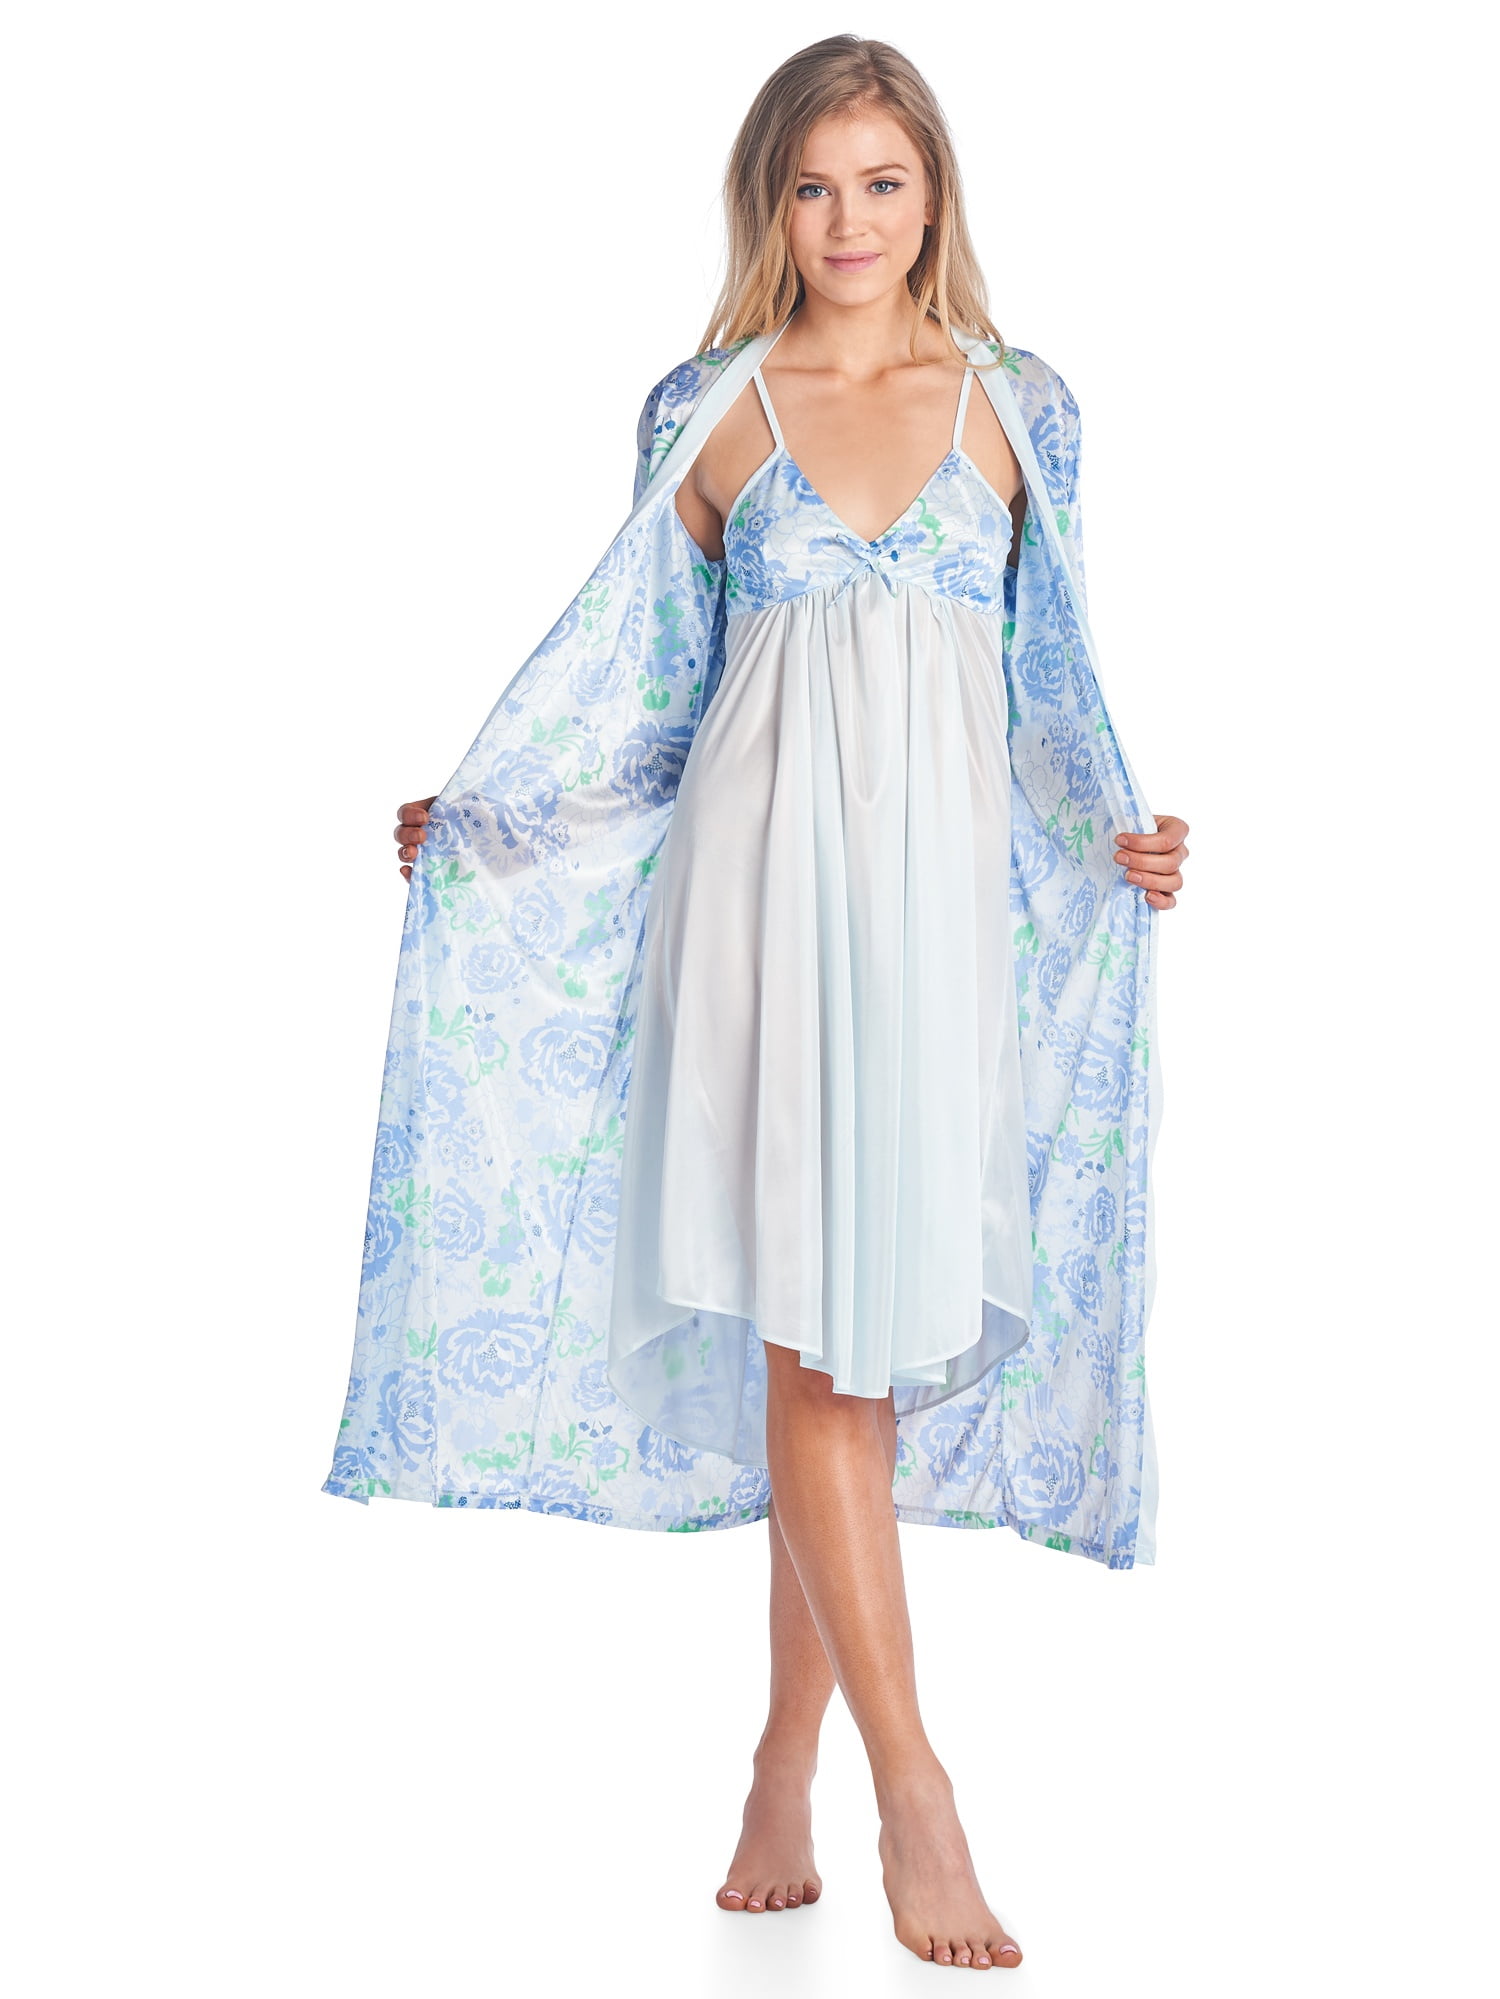 nightie and gown set